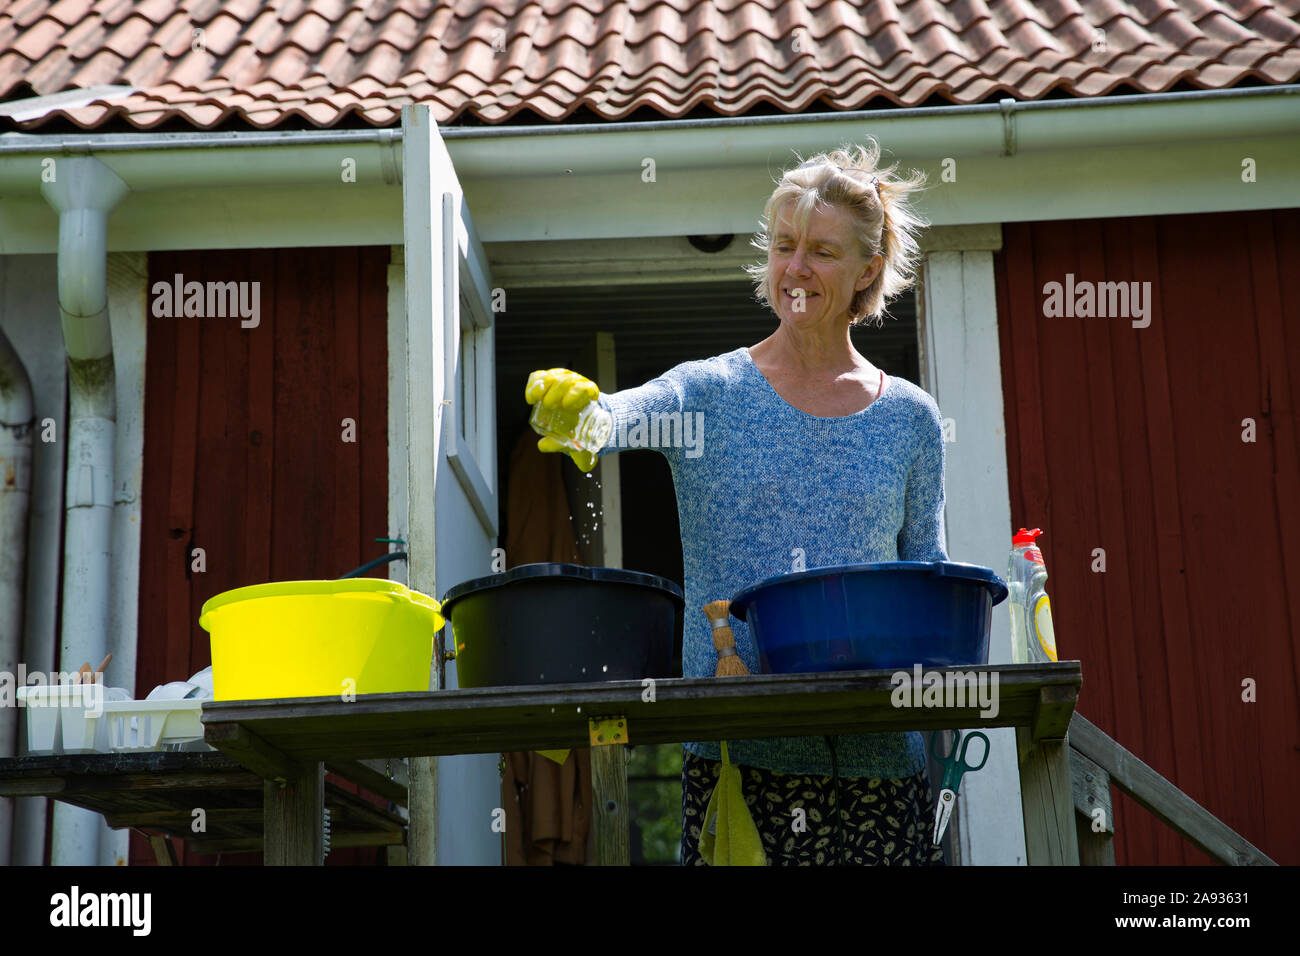 Woman washing dishes in garden Stock Photo